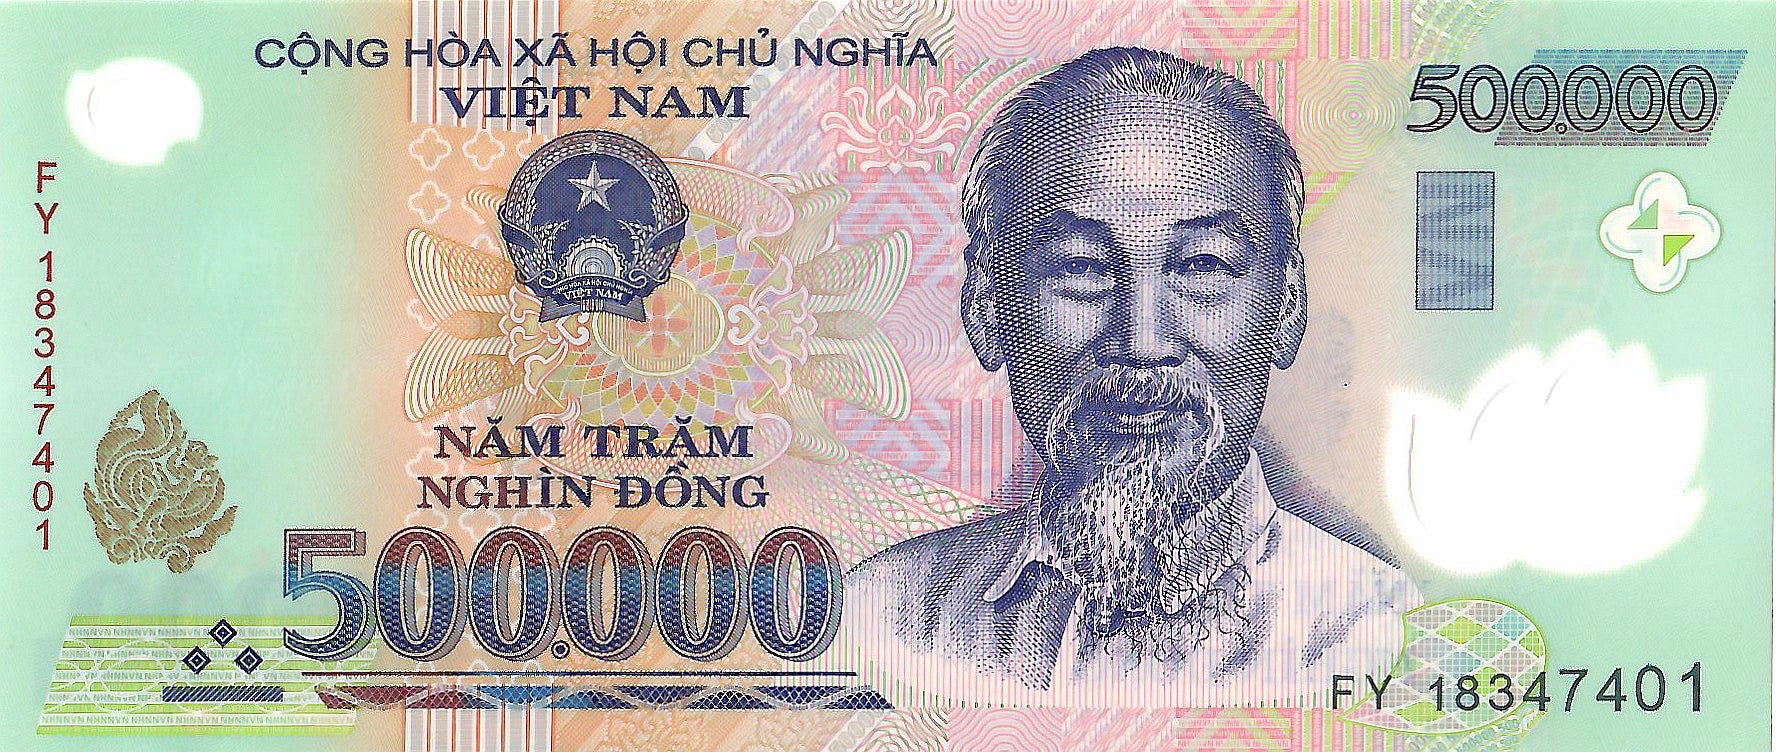 Vietnam 500,000 Dong Banknote, 2018, P-124n, UNC, Polymer